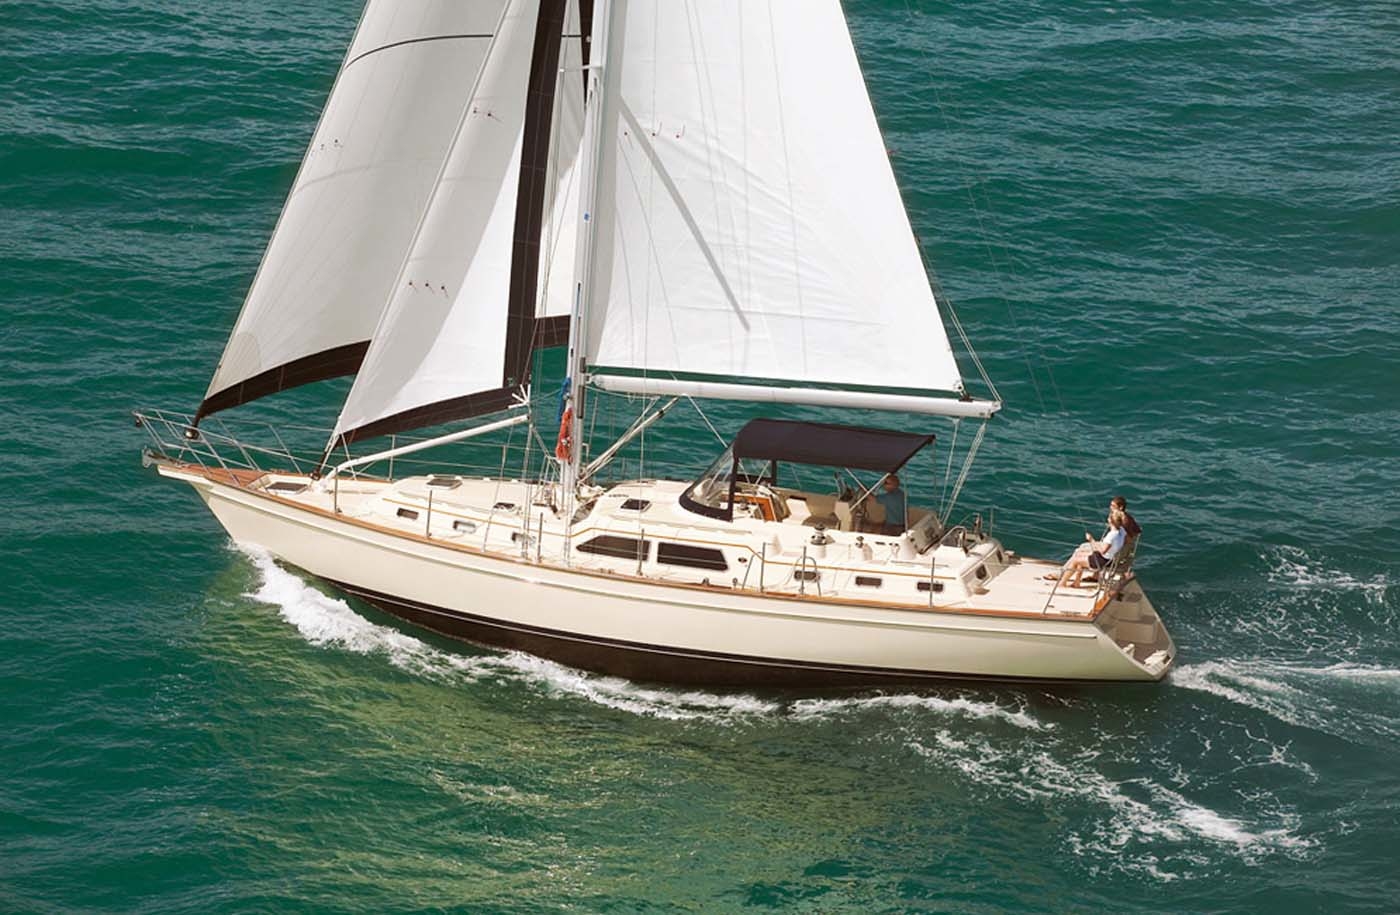 island packet yachts website